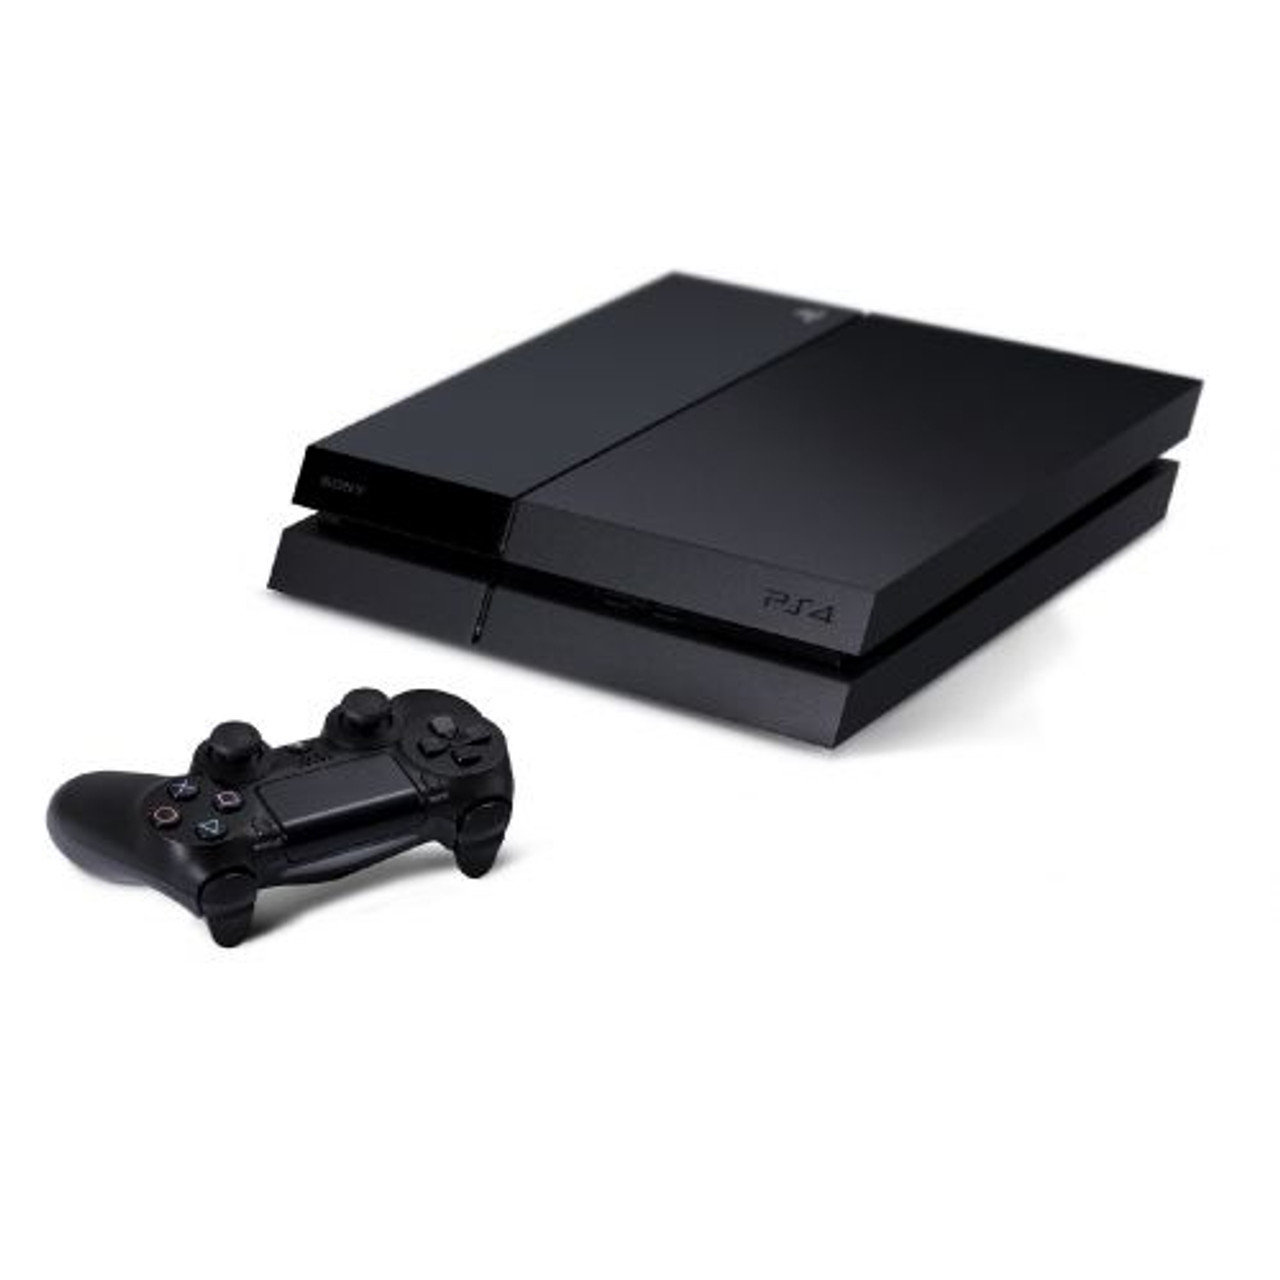 USED* PS4 SYSTEM 500GB (TRADE SKU) (#711719100348) - UP VIDEO GAMES